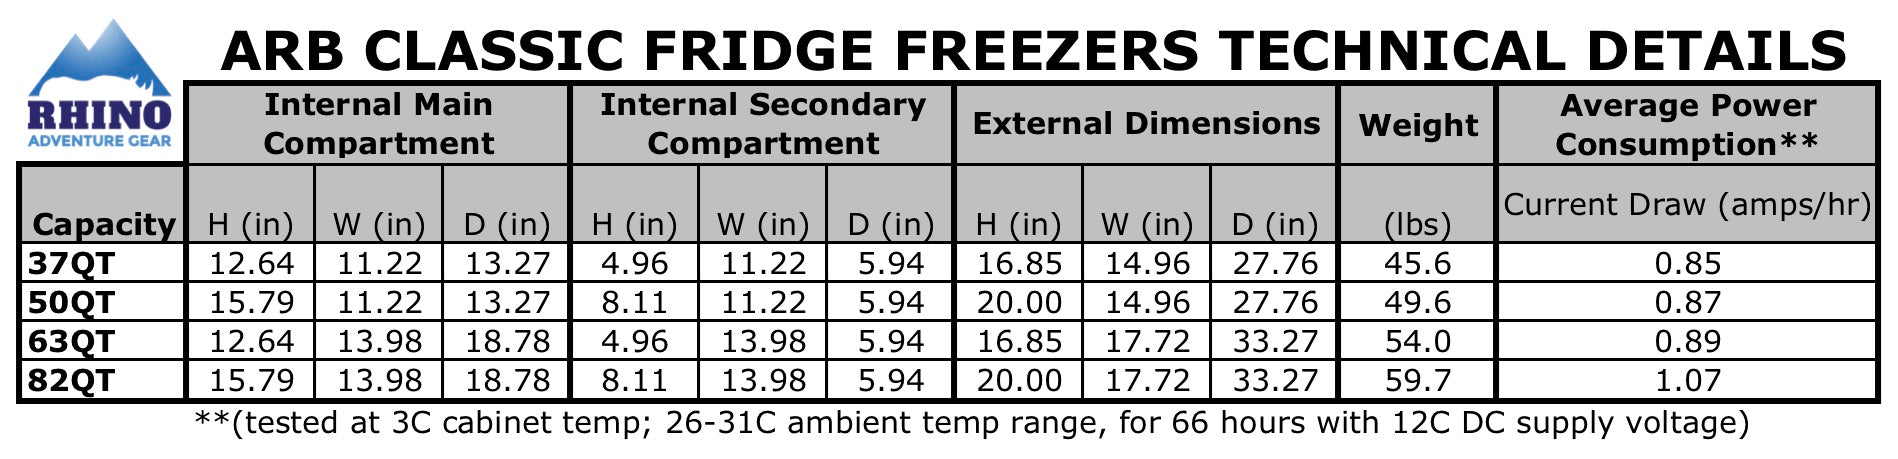 Chart comparing the interior and exterior dimensions, weight, and power consumption of the 4 classic ARB fridge freezer size models